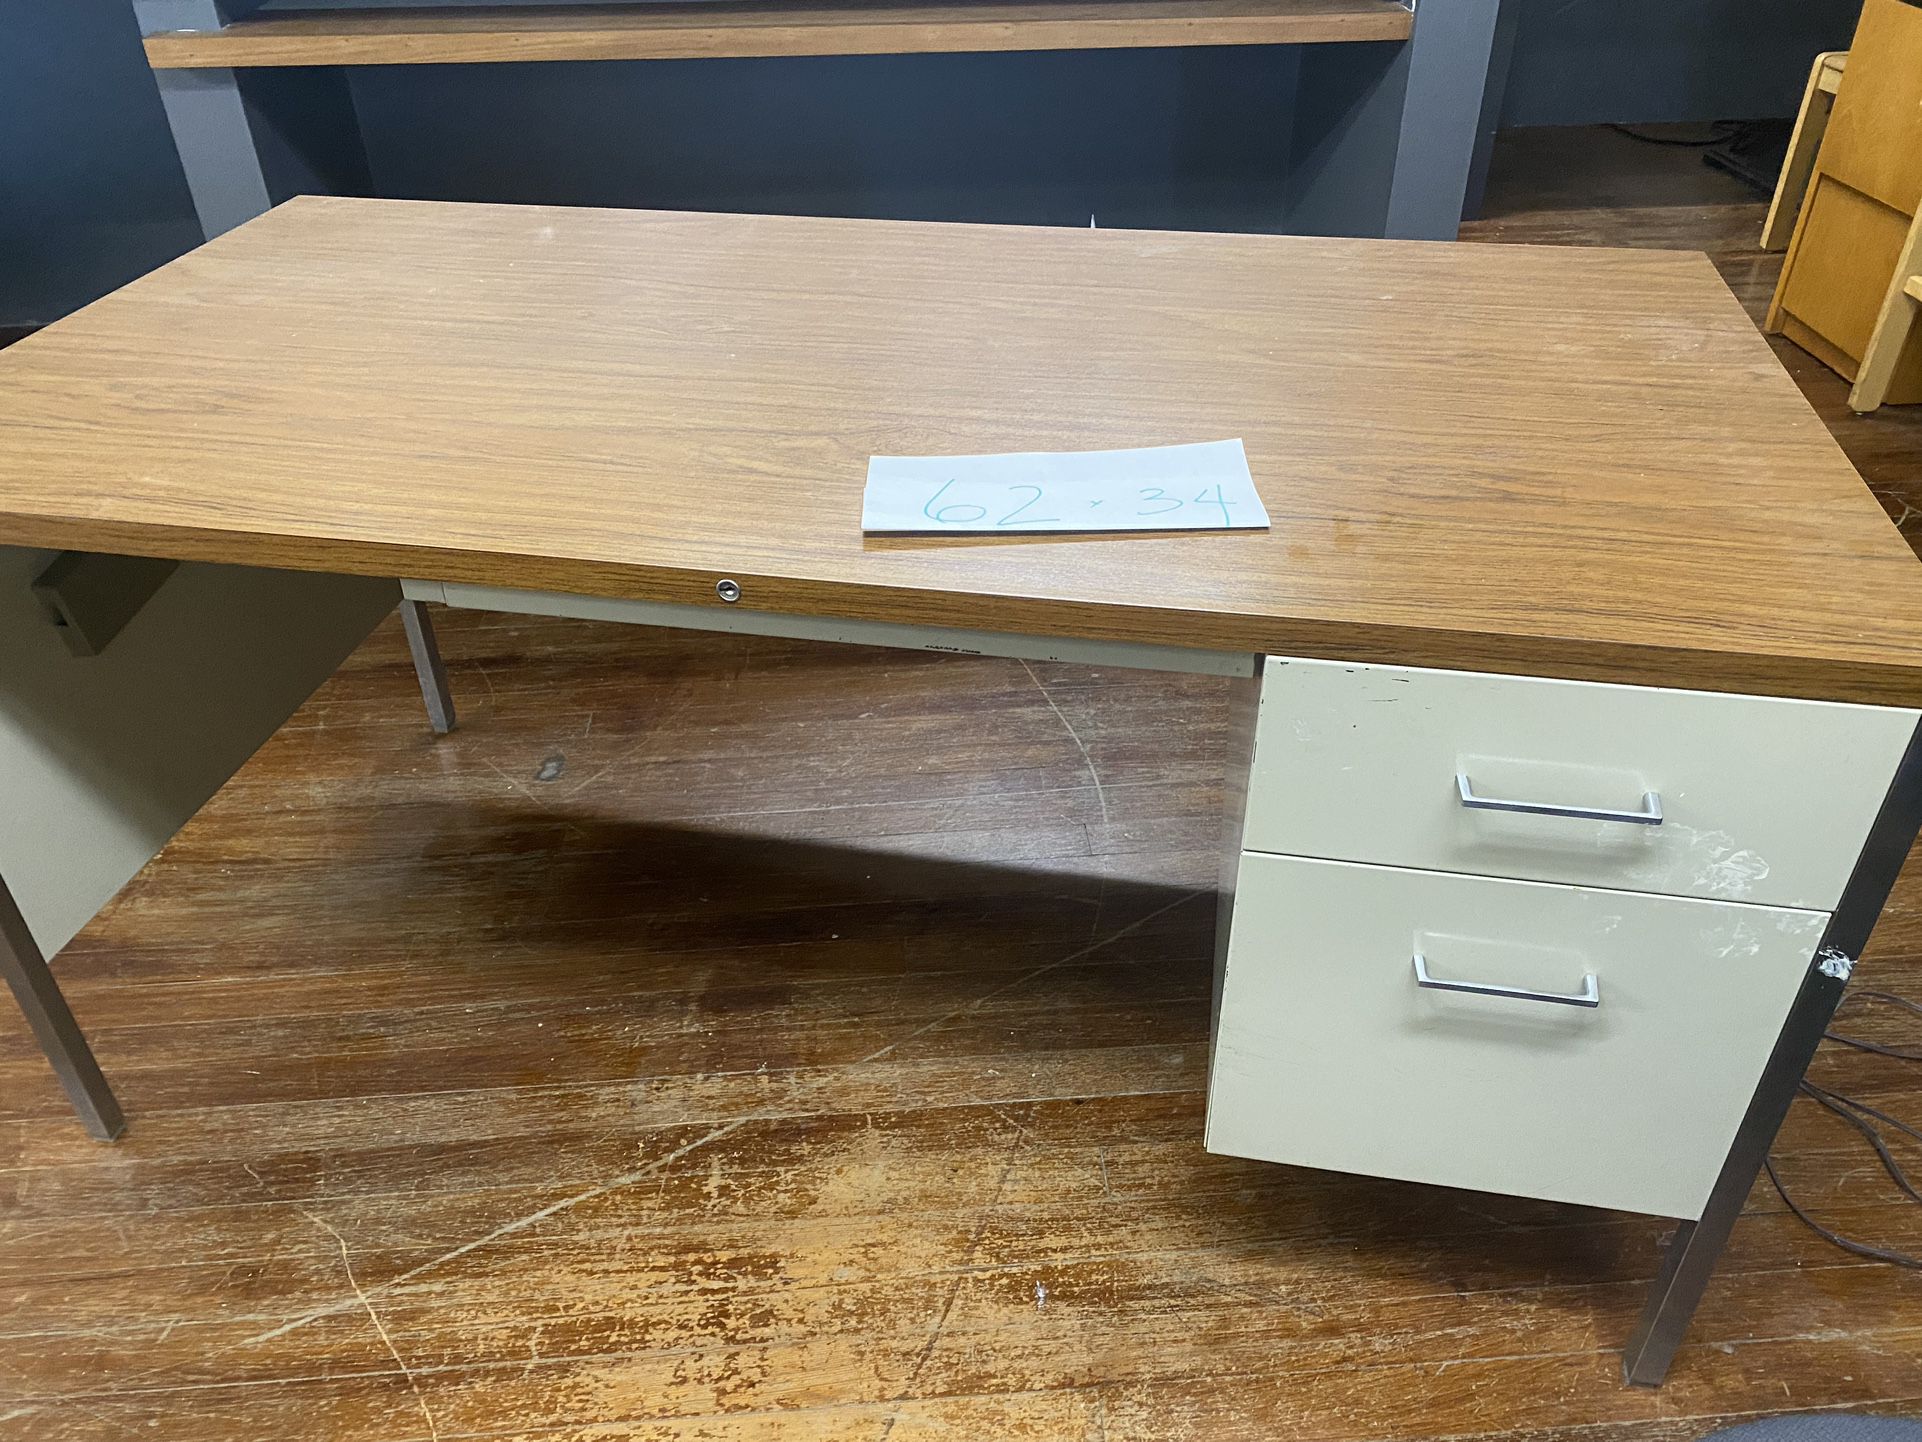 Desks- Several Available. Different Styles. $20 Each OBO